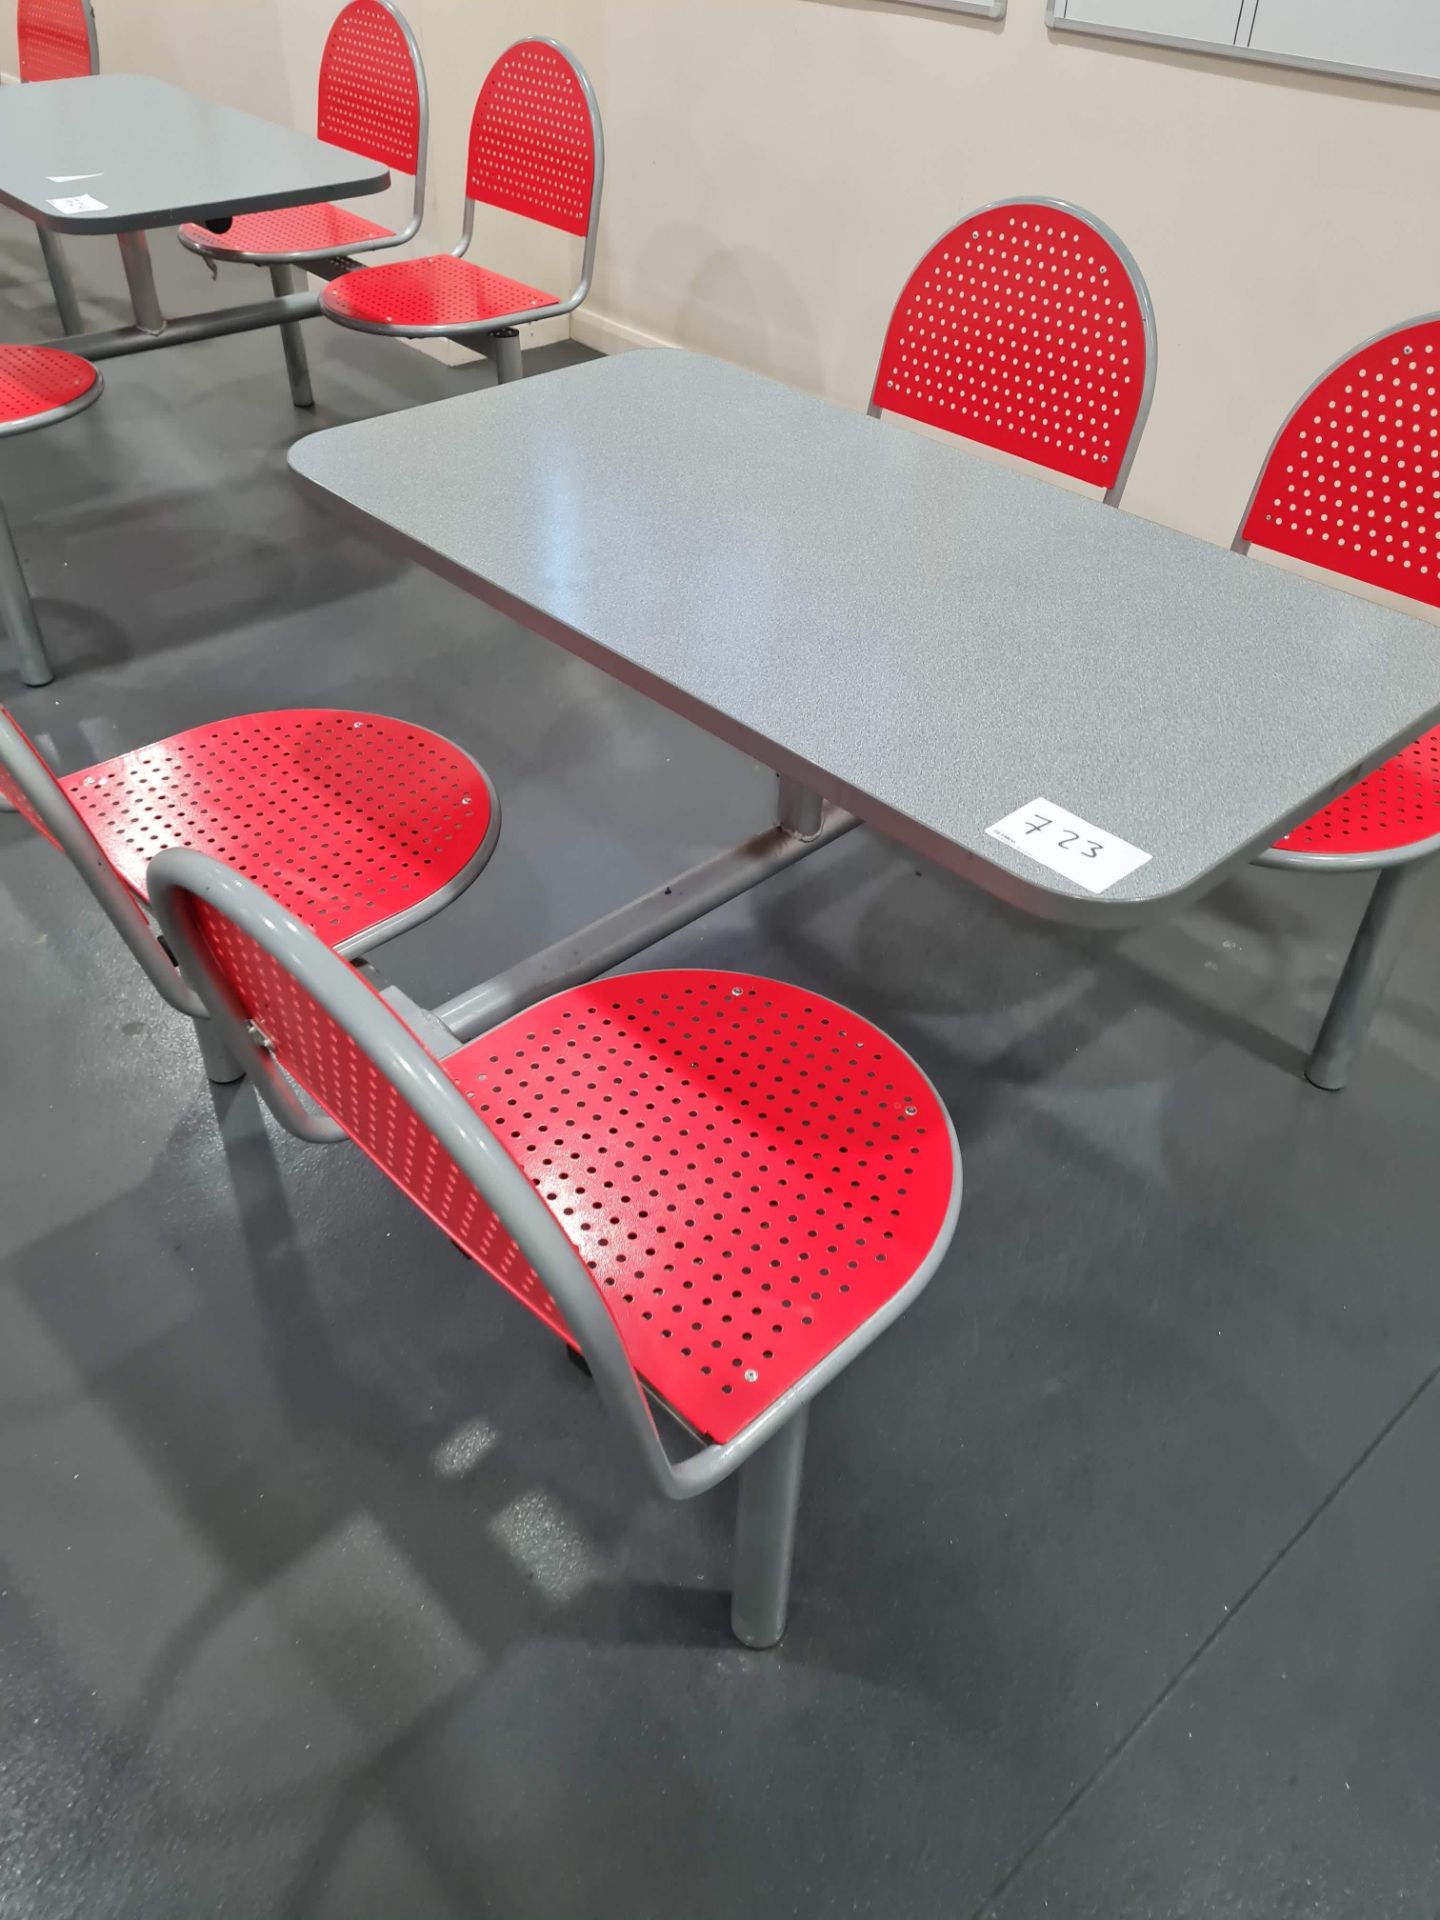 Four Person Steel Framed Canteen Table